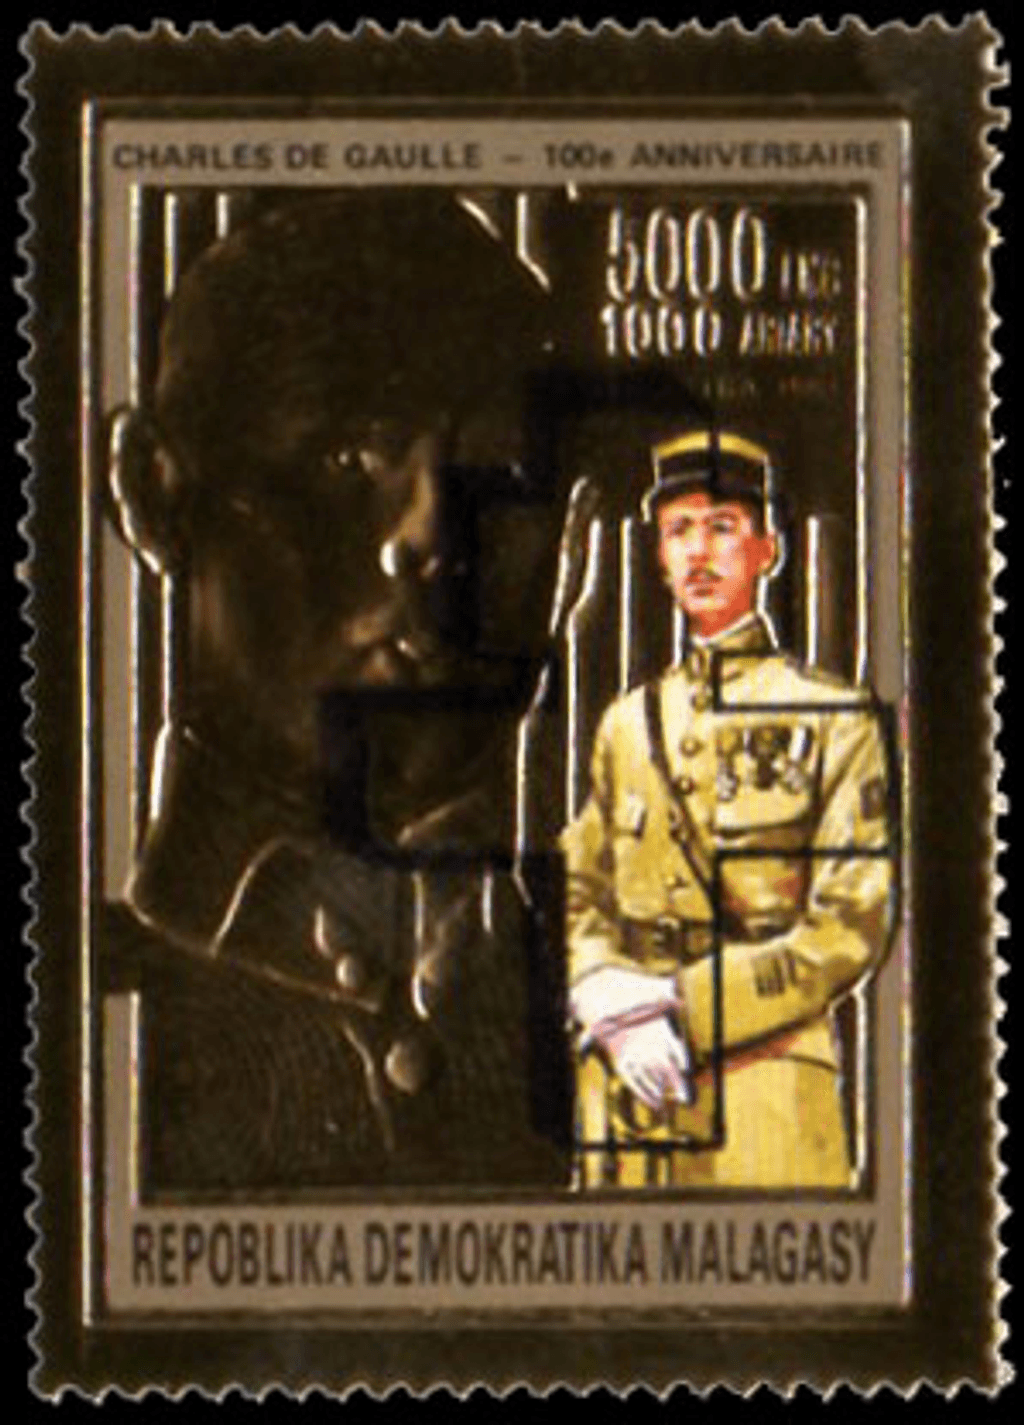 25th anniversary of the death of General de Gaulle  II  GOLD  1995